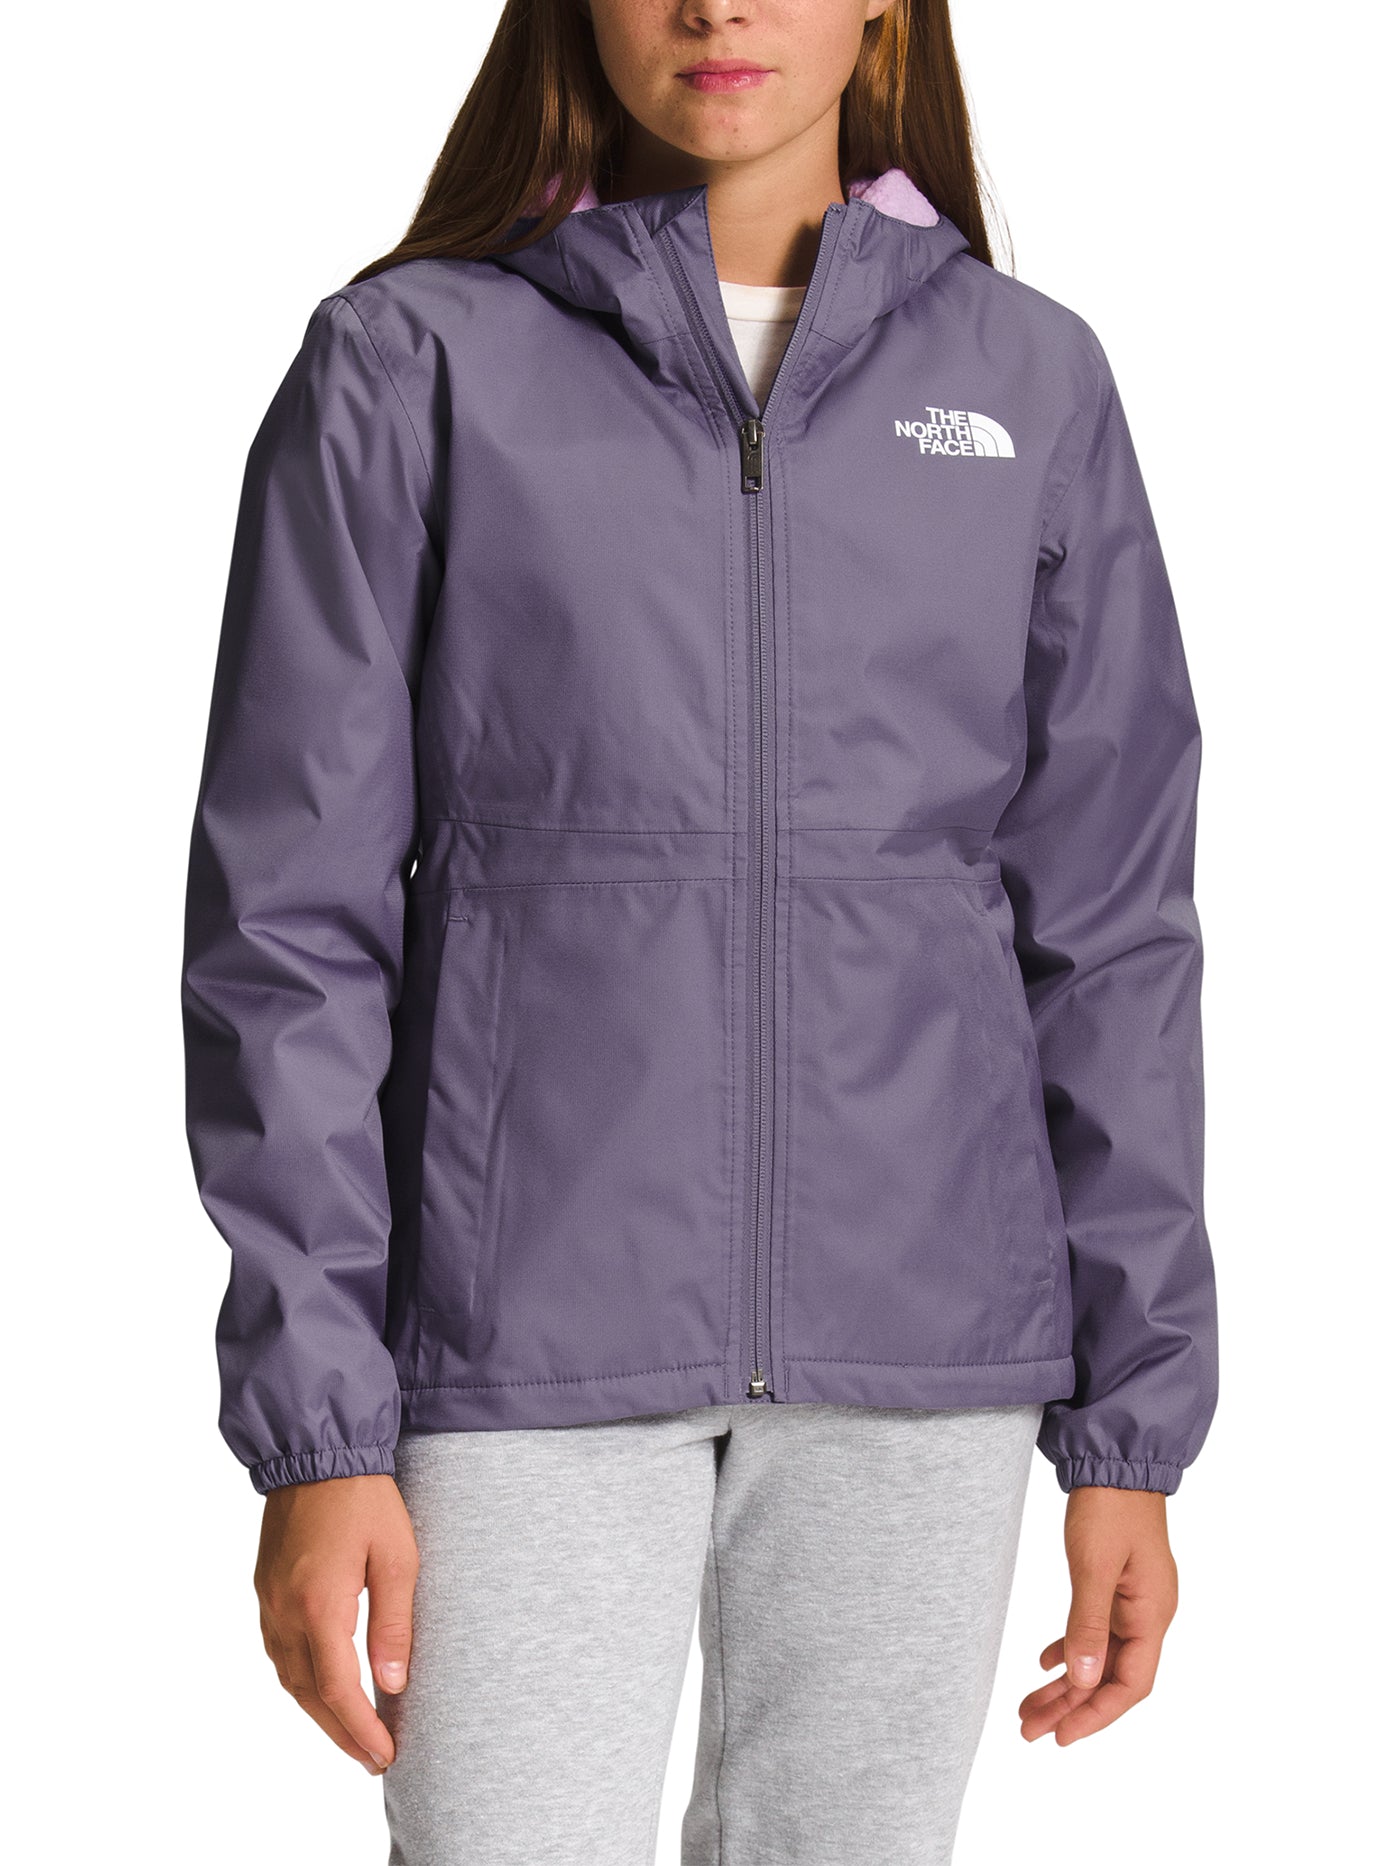 The North Face Spring 2023 Warm Storm Rain Jacket